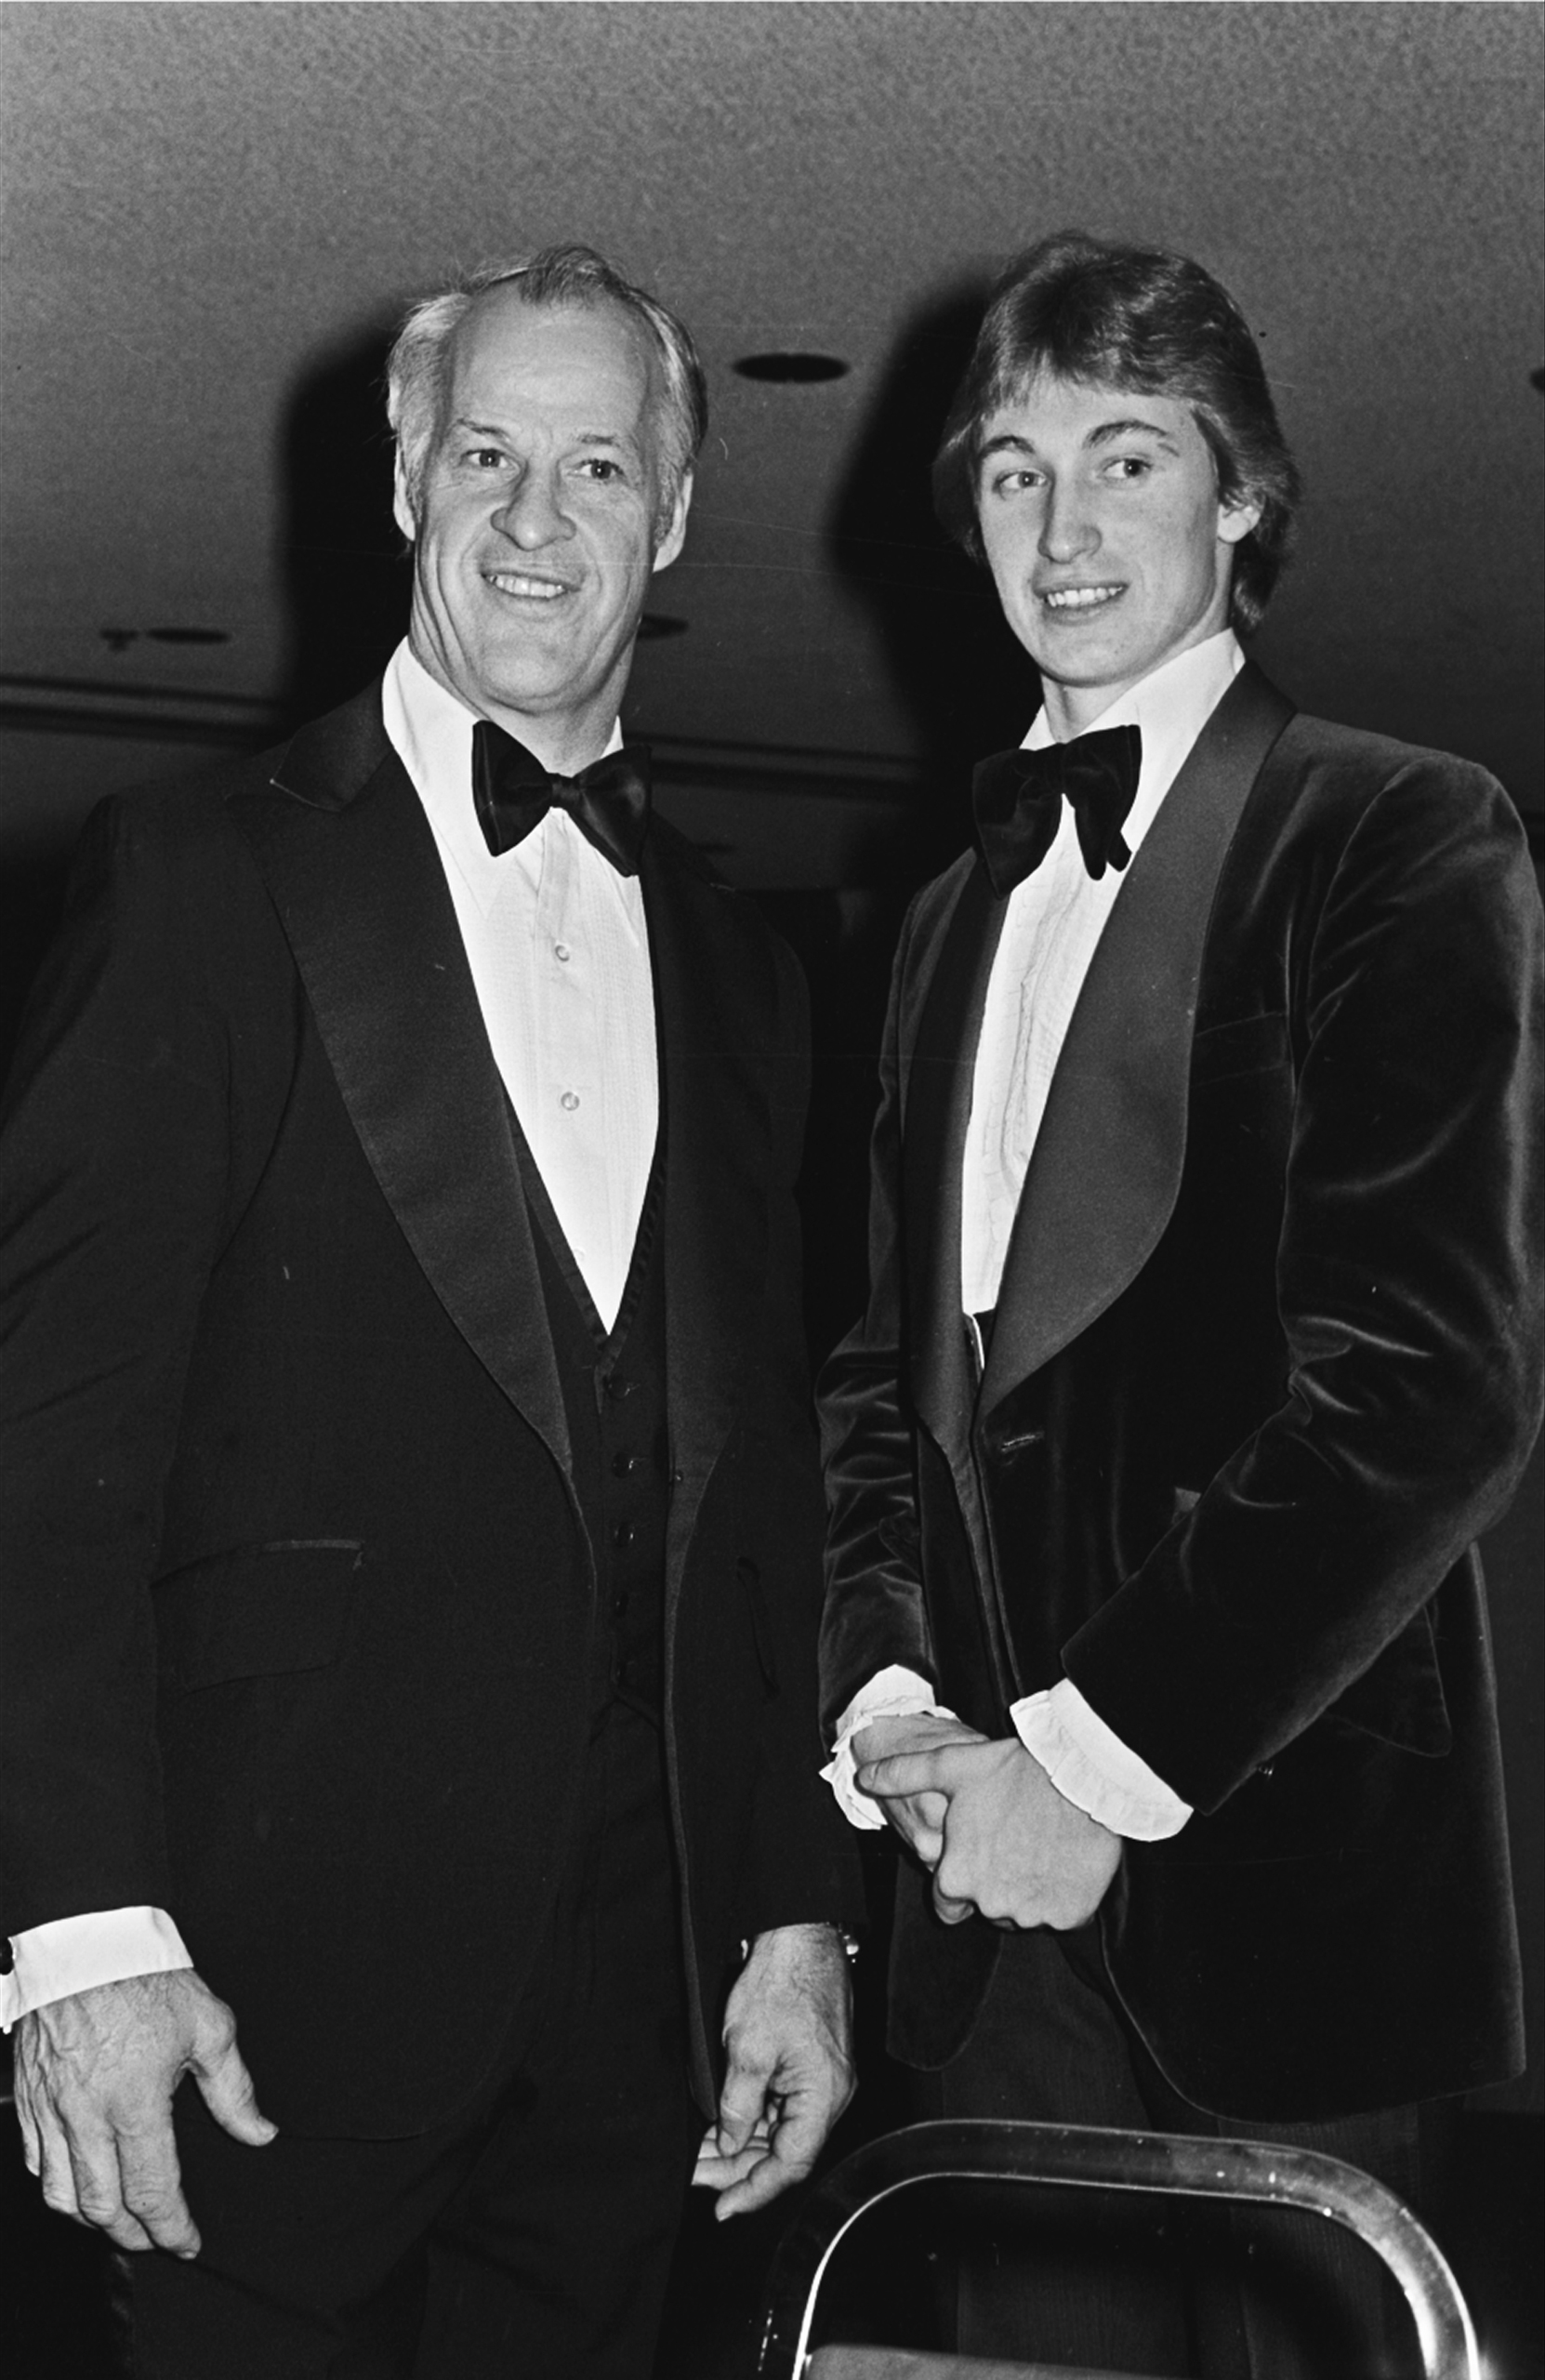 Gordie Howe, left, of the Hartford Whalers, and Wayne Gretzky of the Edmonton Oilers, pose for photographers at the NHL All-Star benefit dinner in Detroit on Feb. 5, 1980. (JCH—AP)